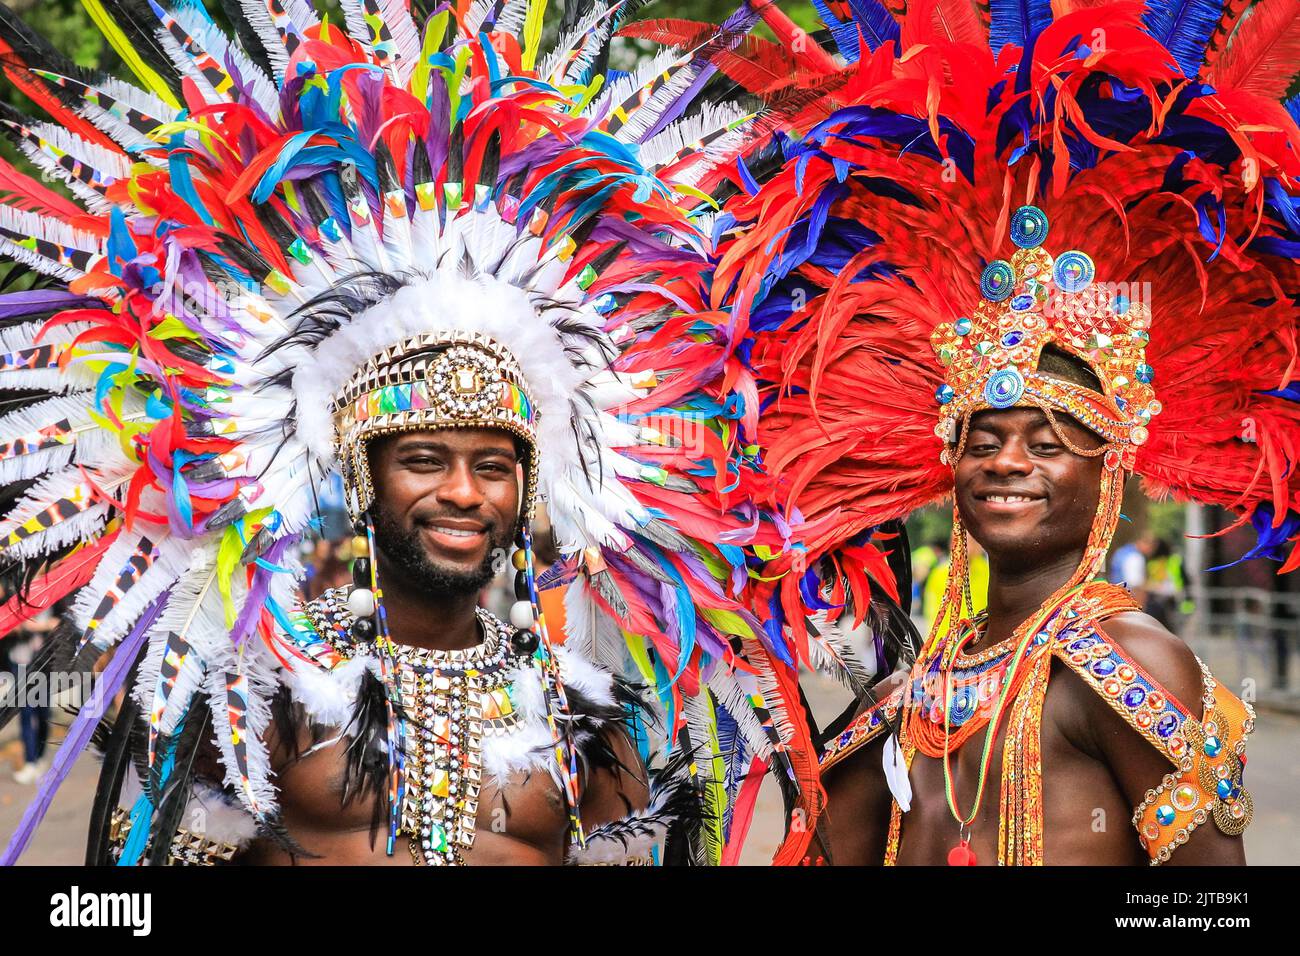 London, UK. 29th Aug, 2022. Two male samba dancers in feather head gear. Participants and revellers have fun along the main parade at Notting Hill Carnival 2022. The carnival, a celebration of Caribbean culture, returns to London after 2 years of restrictions and is expected to easily exceed 1 million visitors again this year. Credit: Imageplotter/Alamy Live News Stock Photo